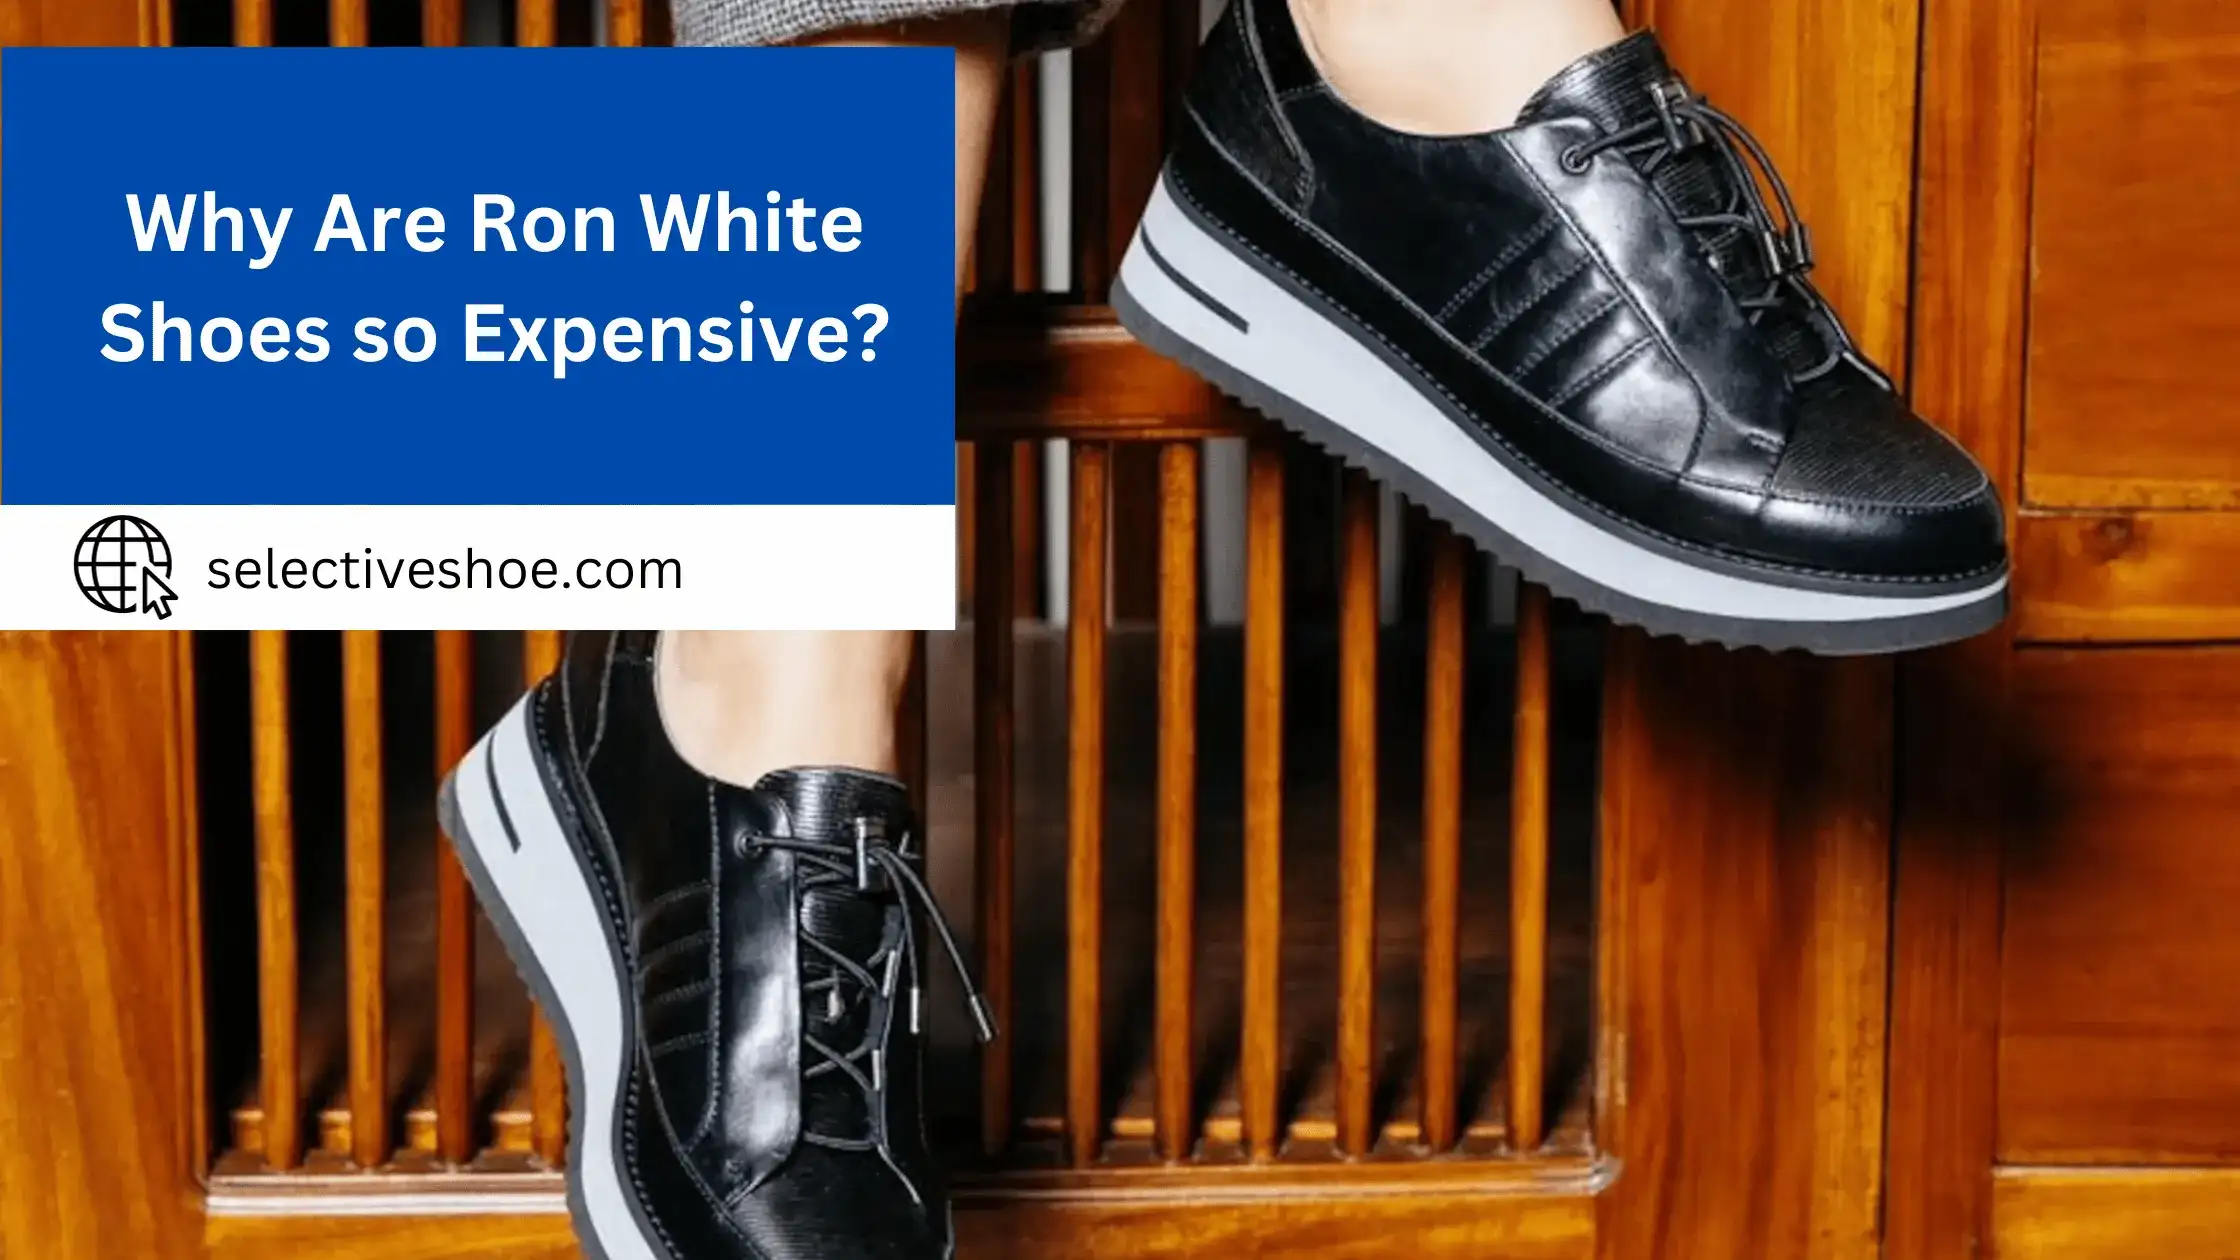 Why Are Ron White Shoes so Expensive? Expert Analysis